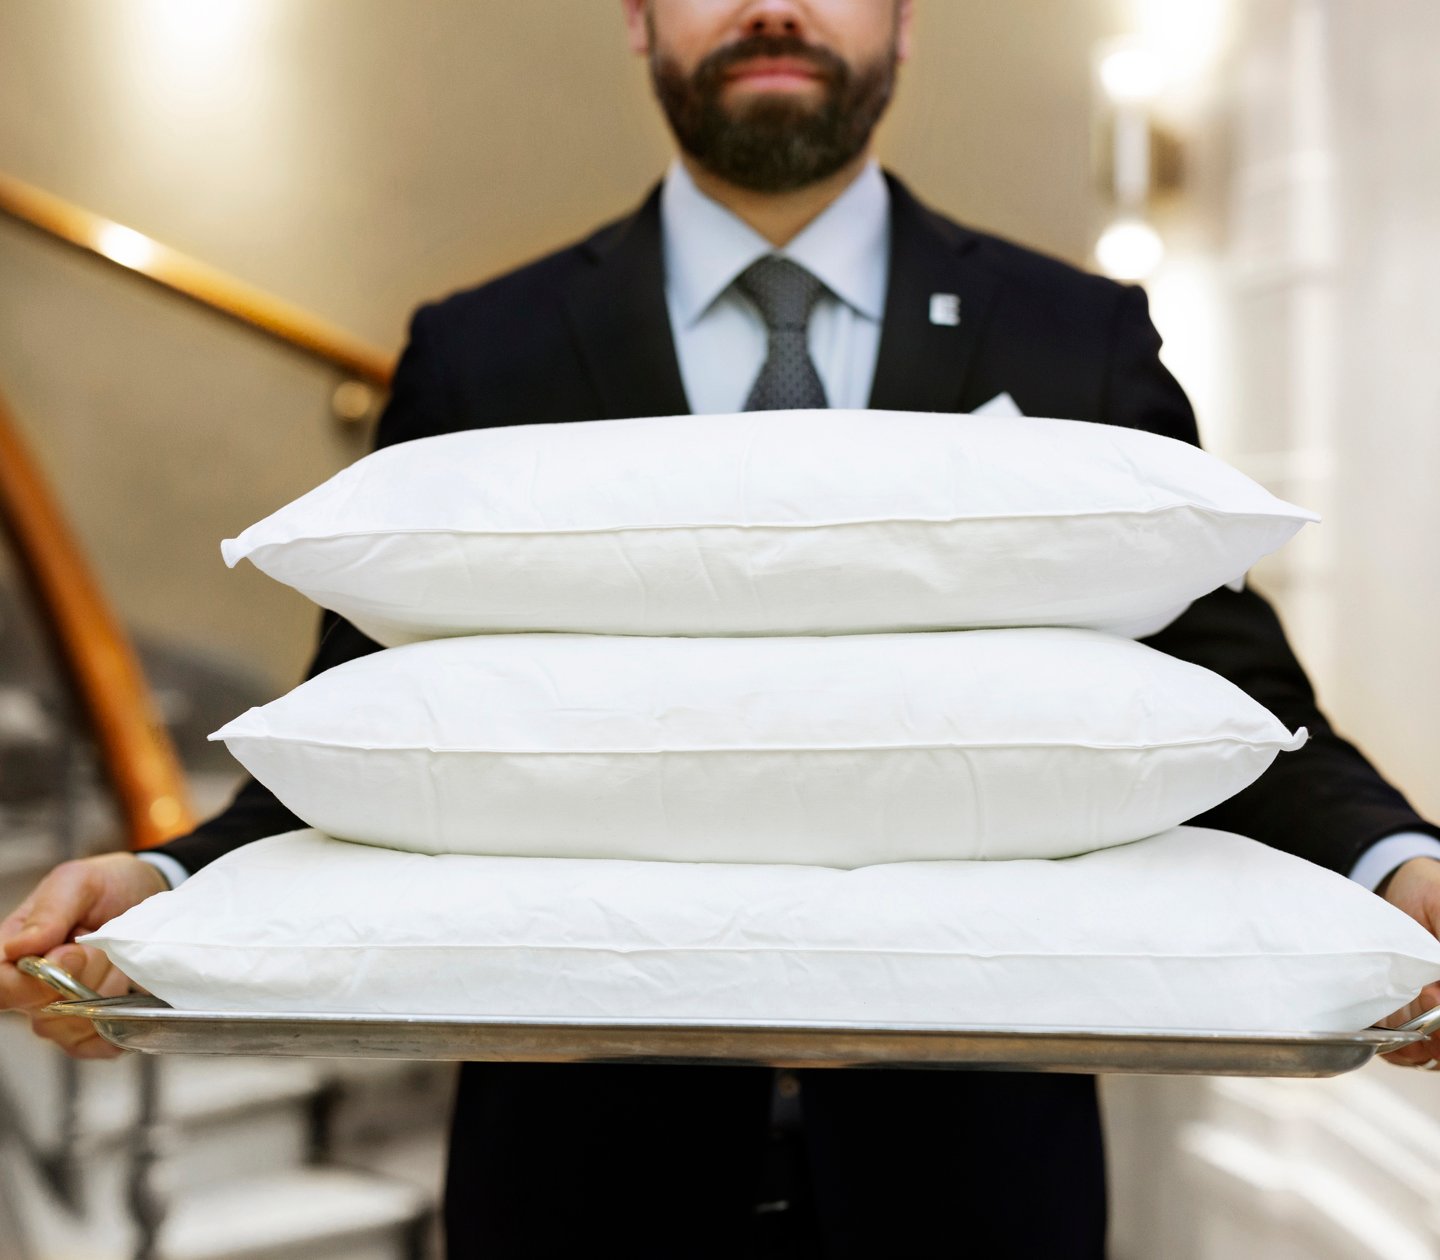 Man in suit carrying three pillows on tray